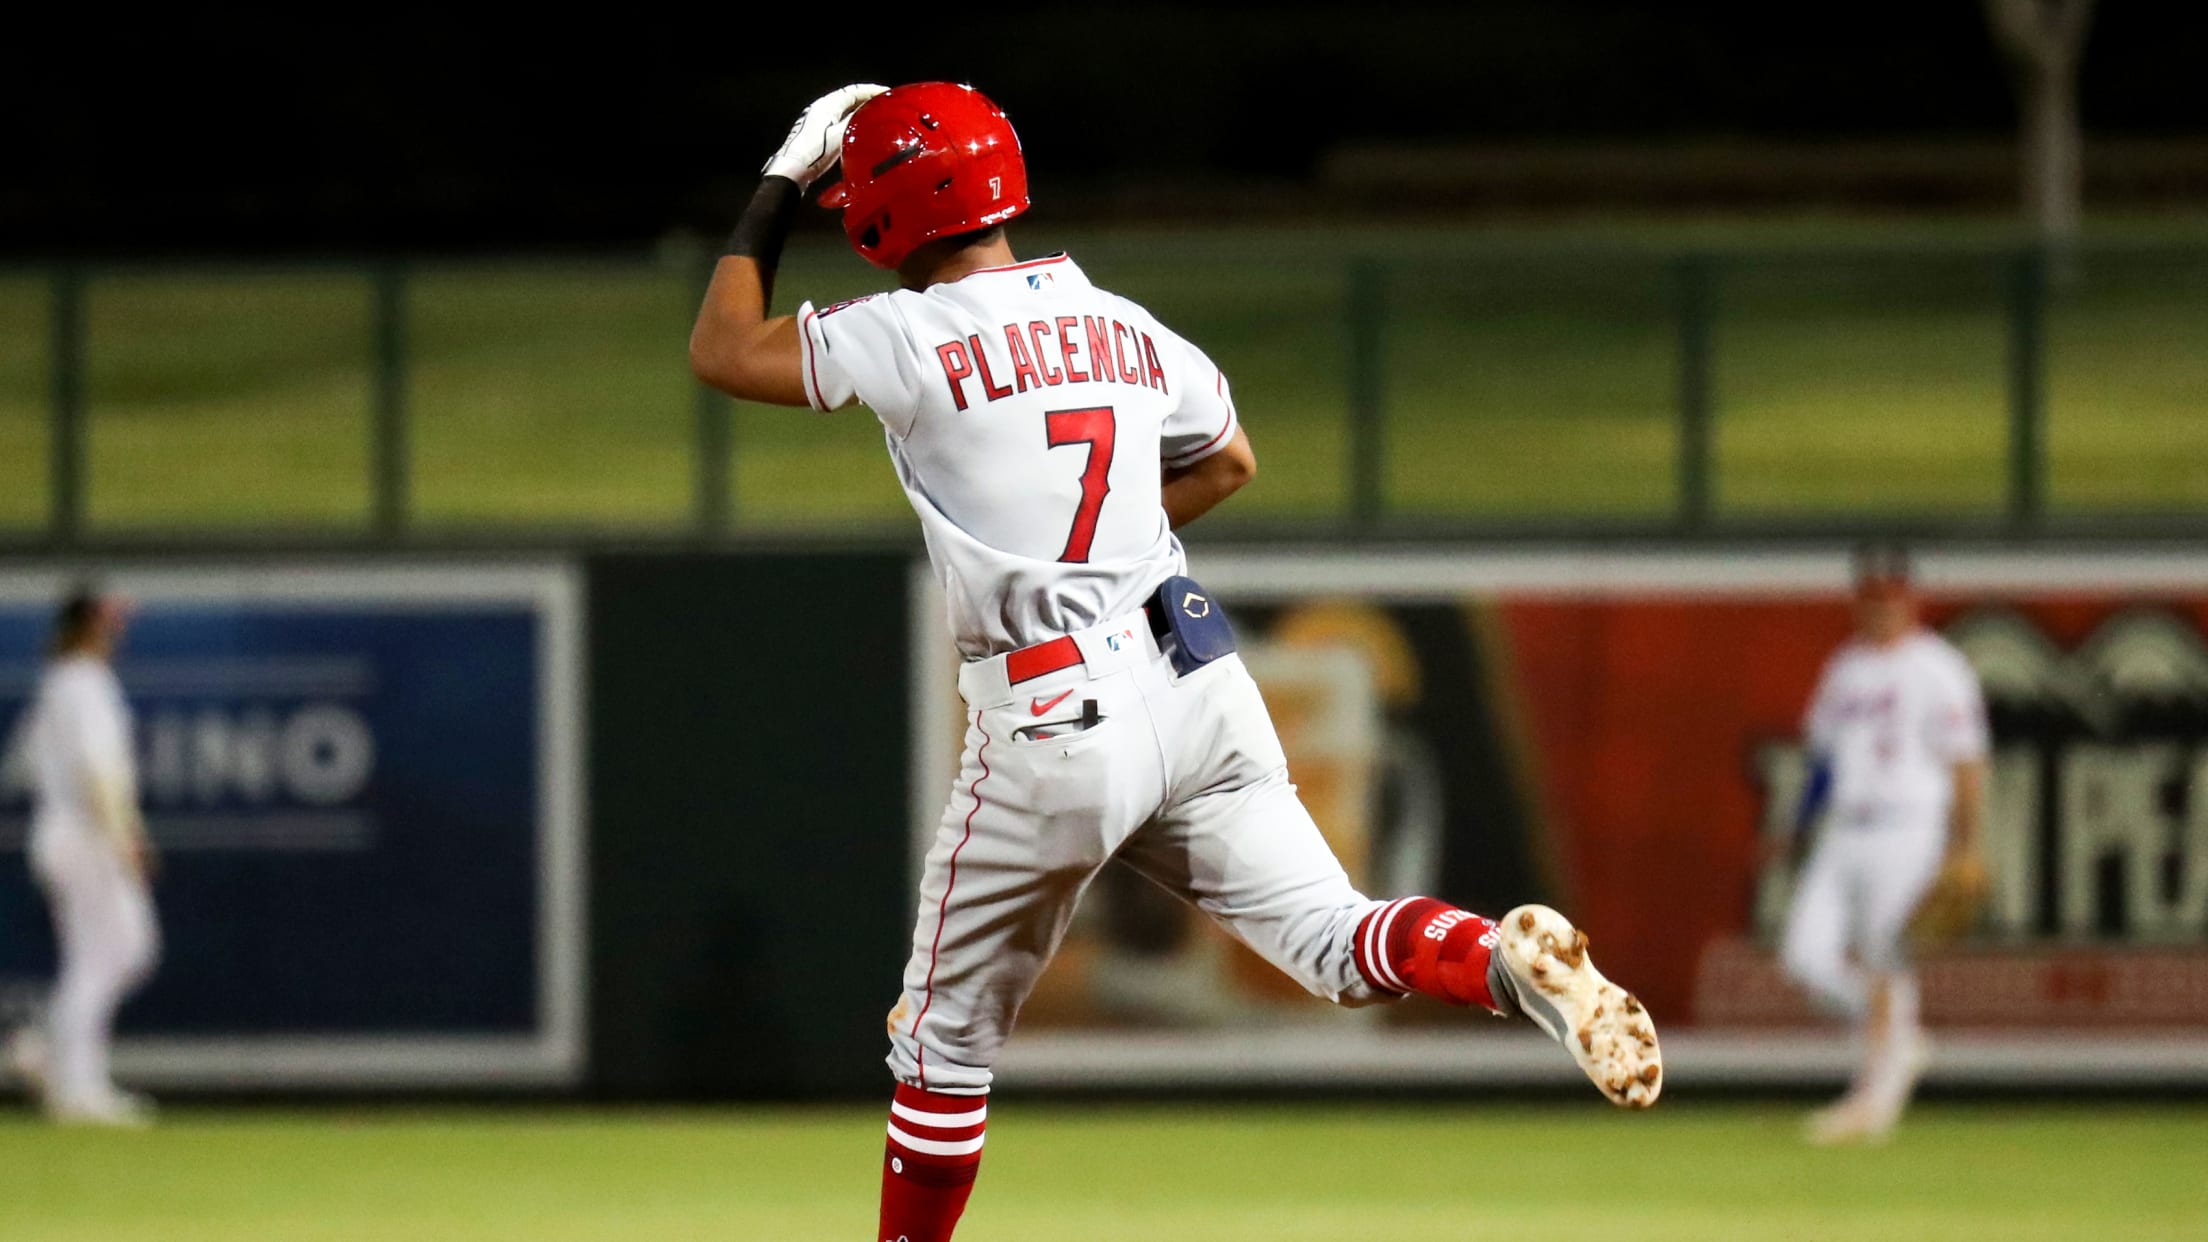 Los Angeles Angels 2022 Top 10 MLB Prospects Chat — College